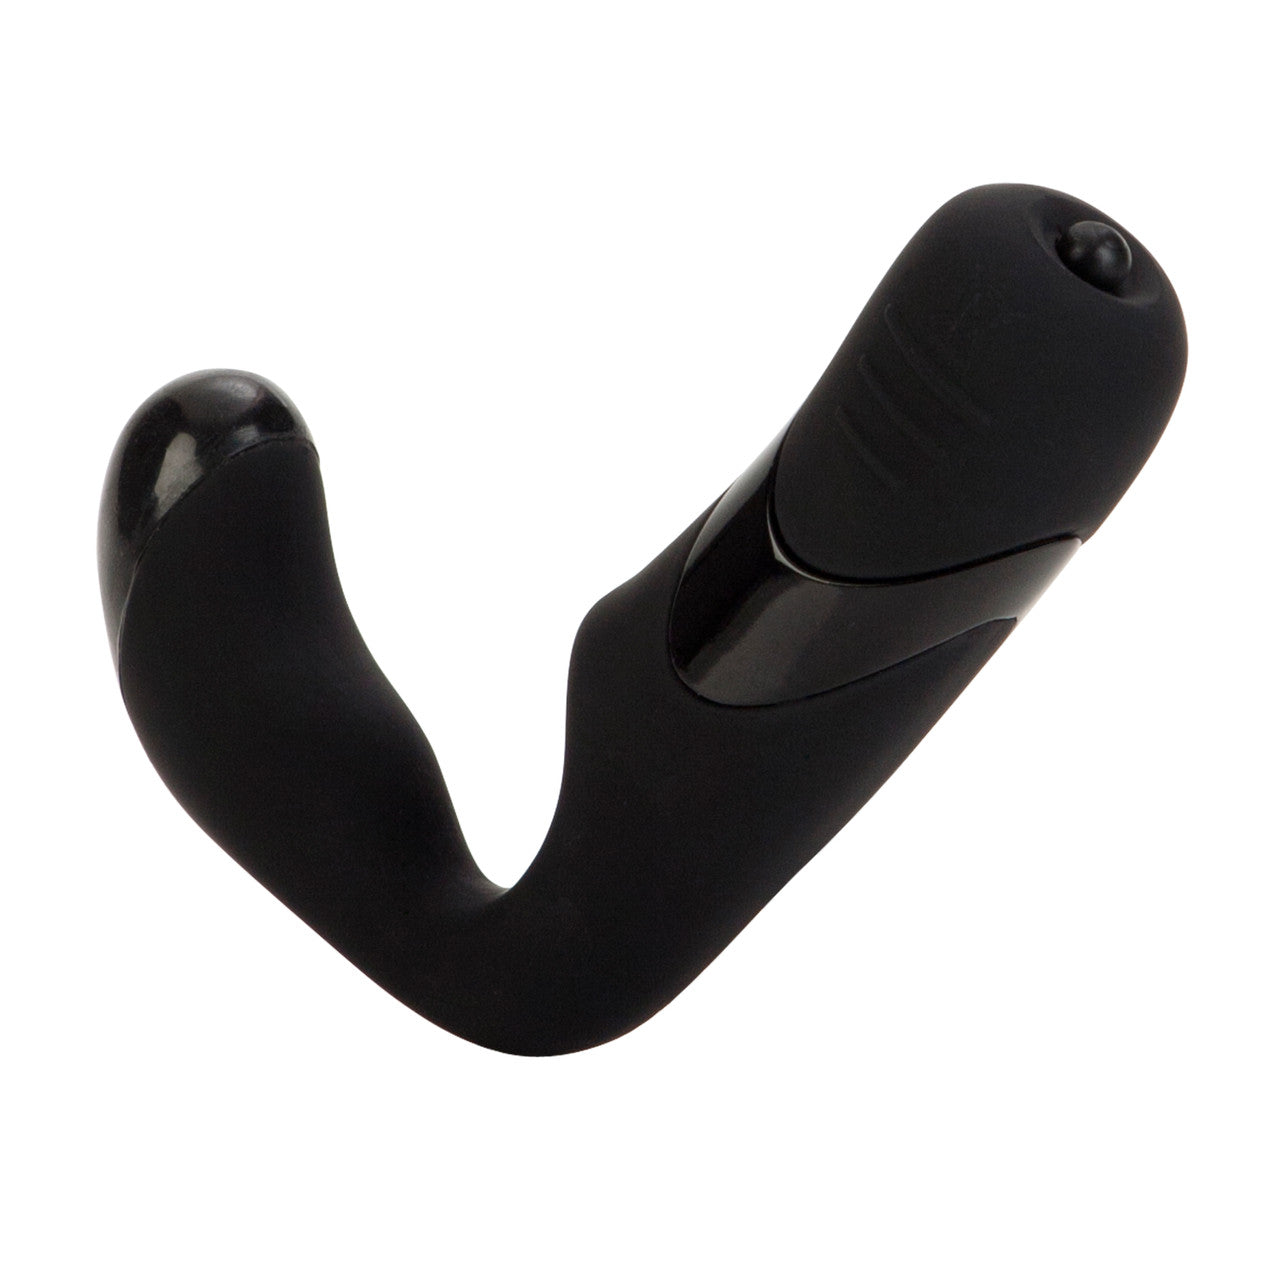 Dr. Joel Kaplan Compact Prostate Massager - Thorn & Feather Sex Toy Canada